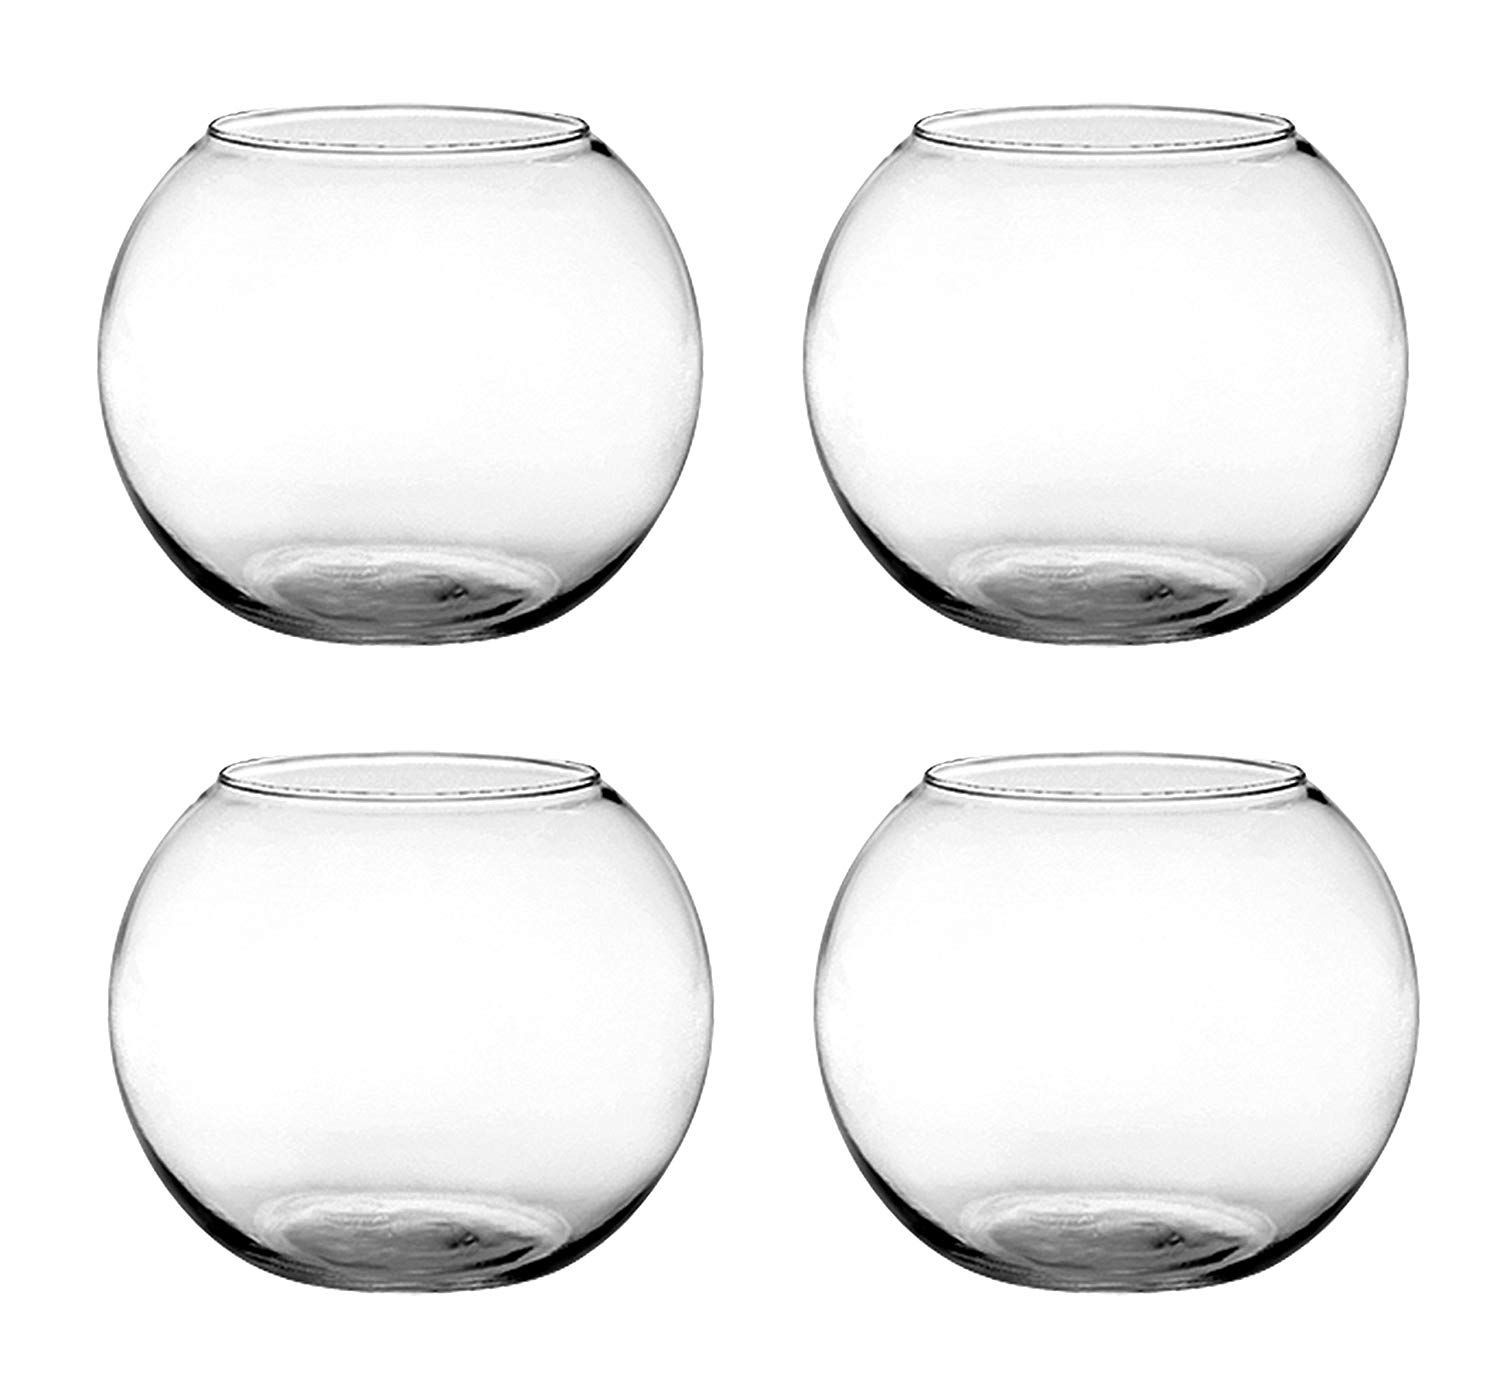 12 Popular Old Vases for Sale 2024 free download old vases for sale of 32 wide mouth vase the weekly world with amazon syndicate sales 6 rose bowl clear planters garden